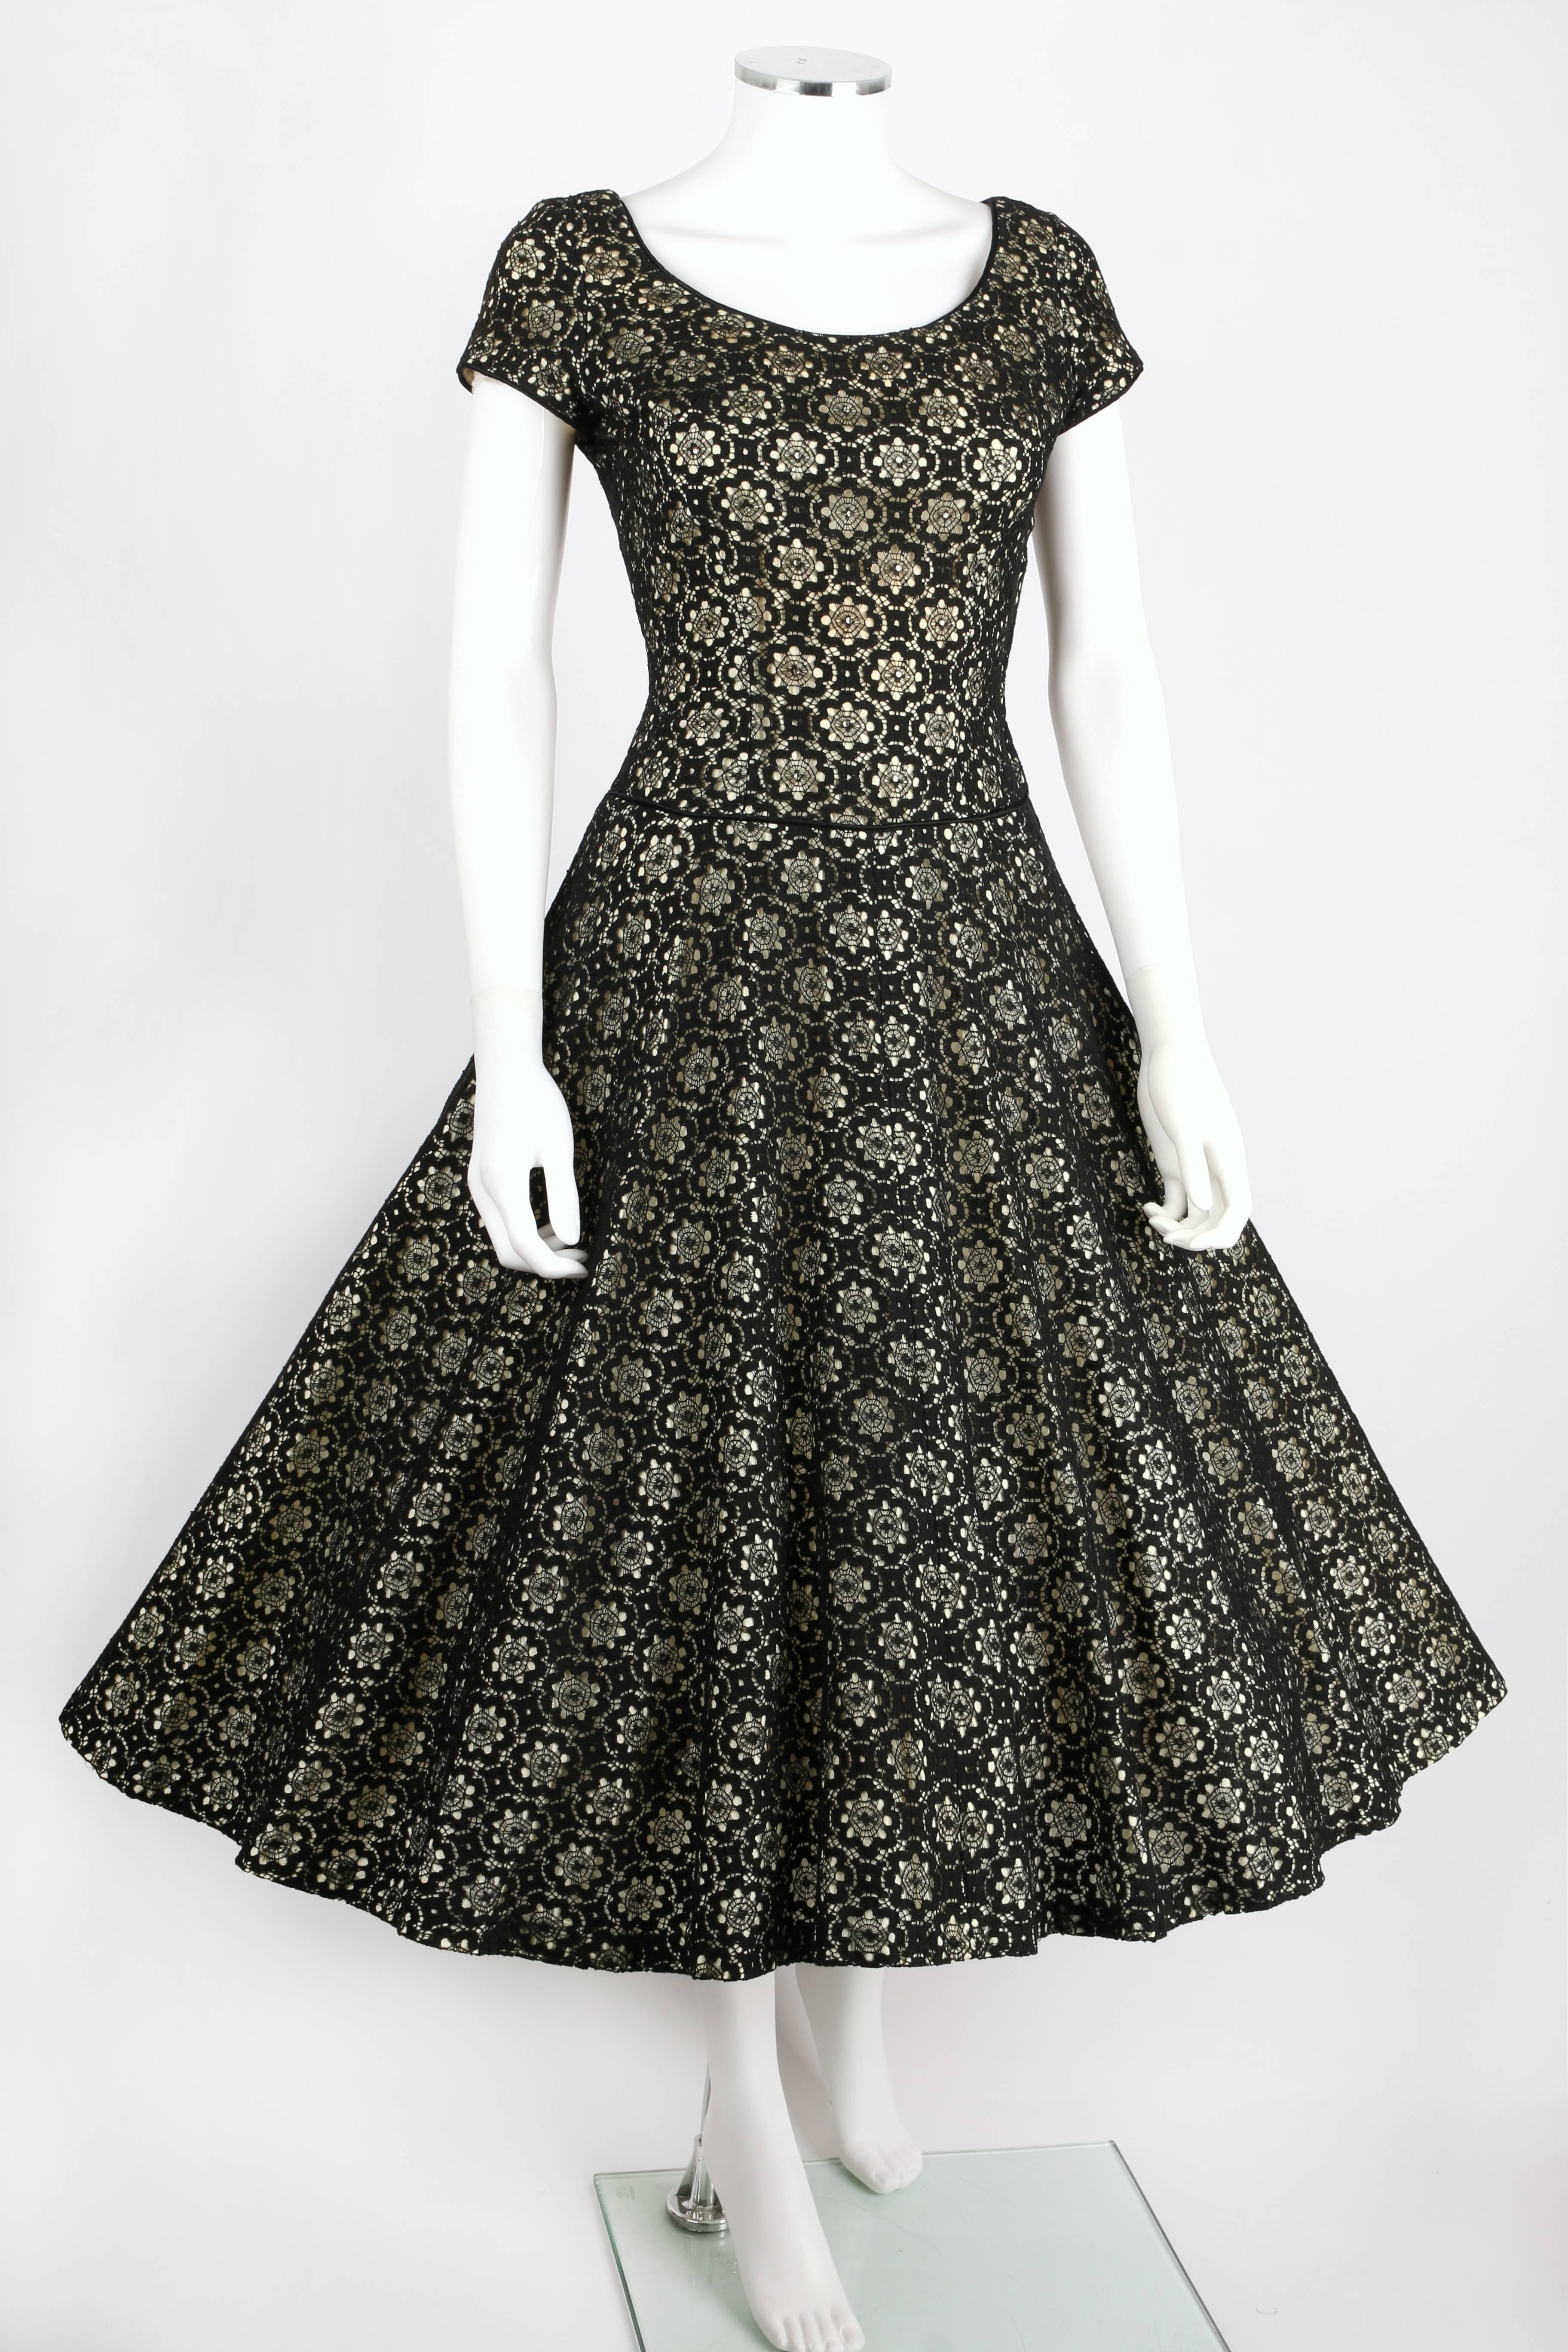 Miss Jane Junior Original c.1950's classic vintage black floral lace party dress. Black floral lace laid over winter white. Cap sleeves. Scoop neckline at front and back. Bodice is embellished with rhinestones. Black piping detail at neckline and